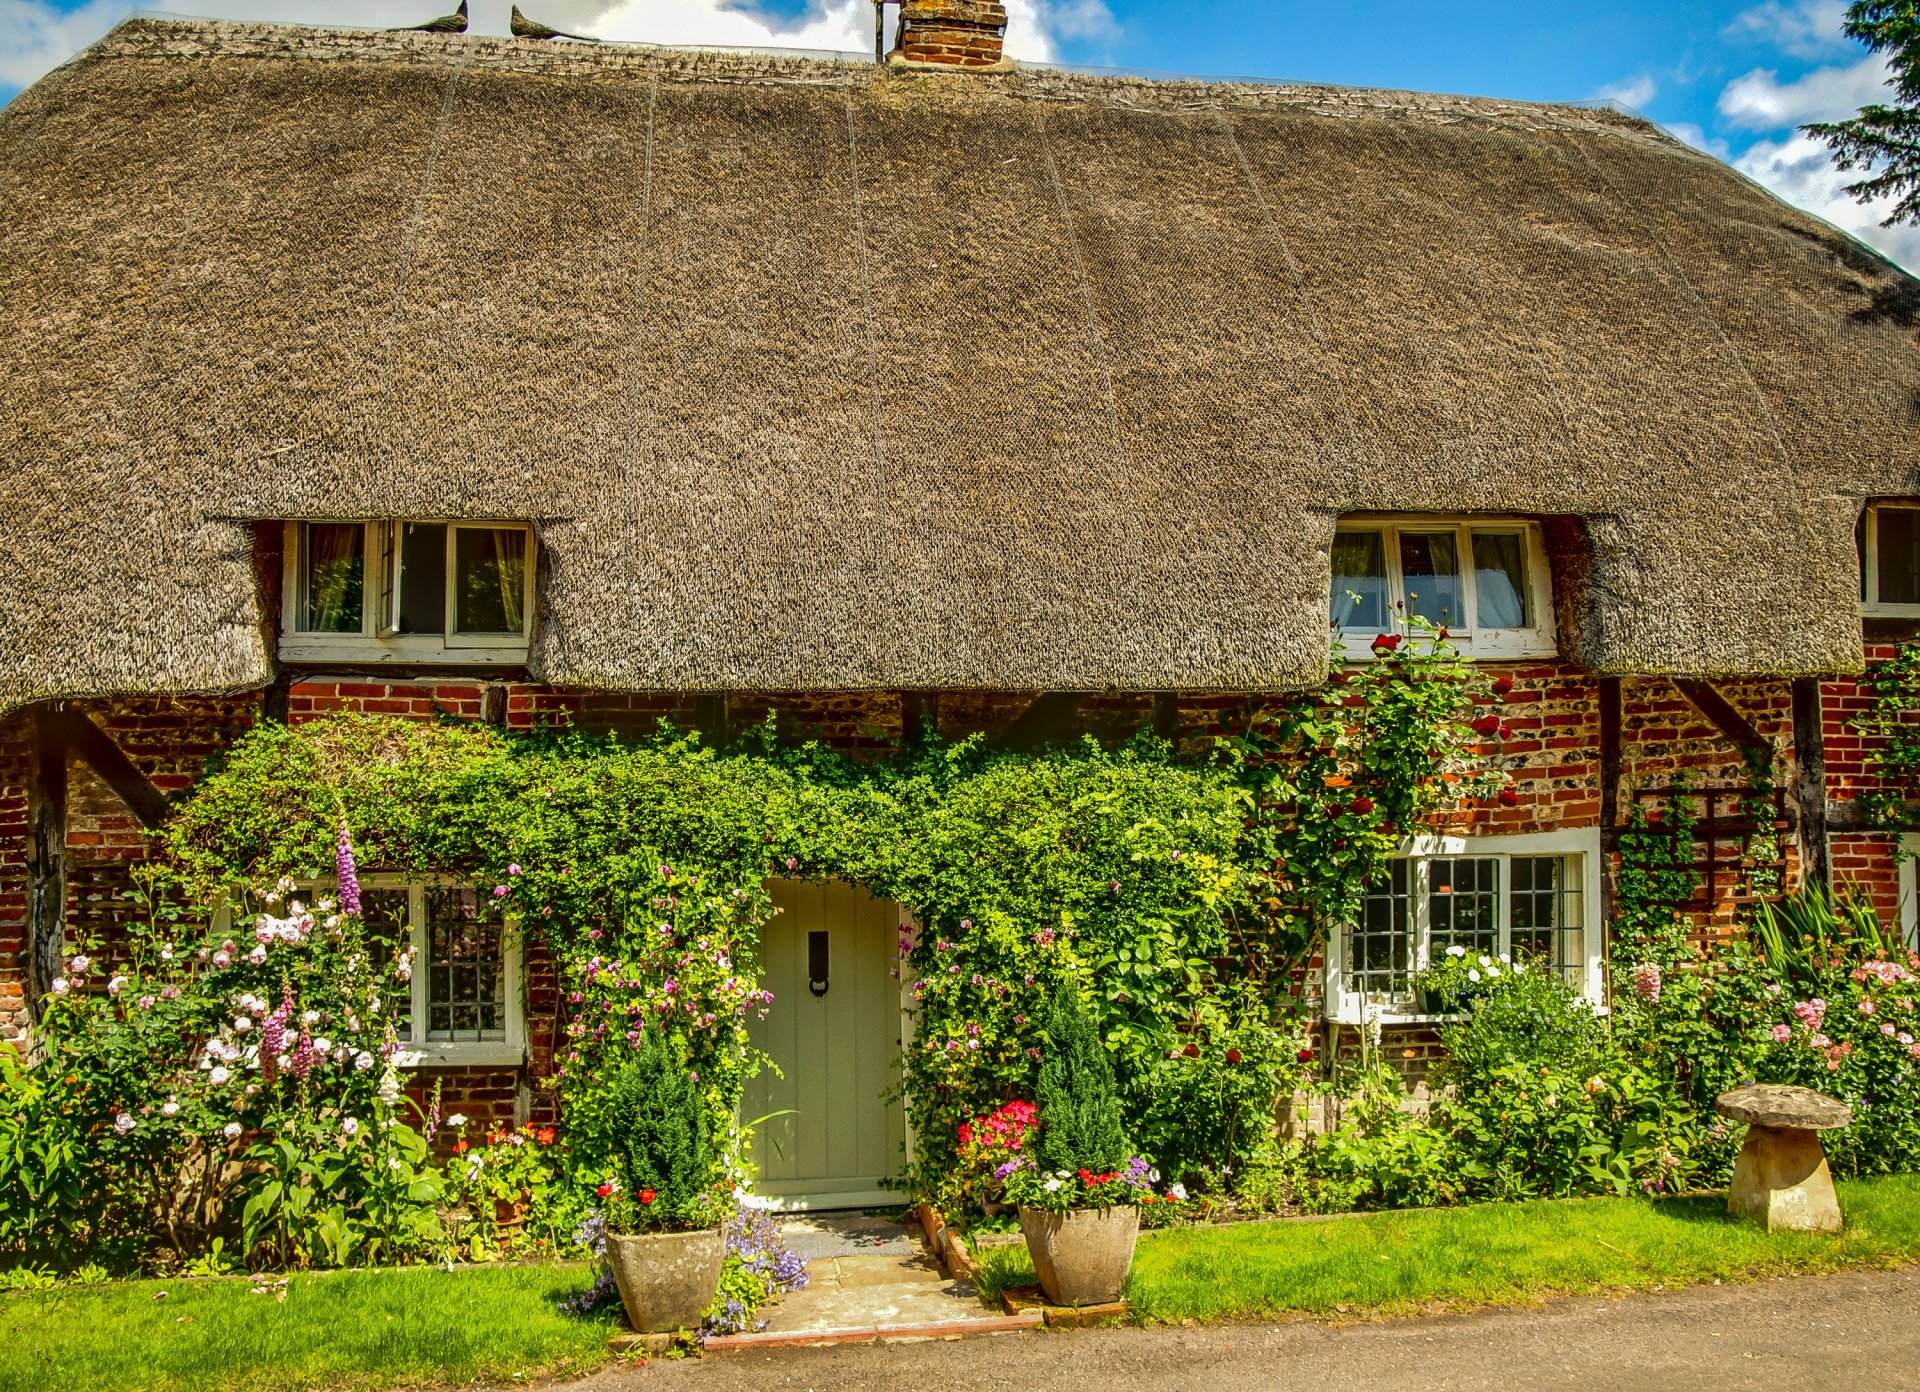 Thatched-Roof House in England